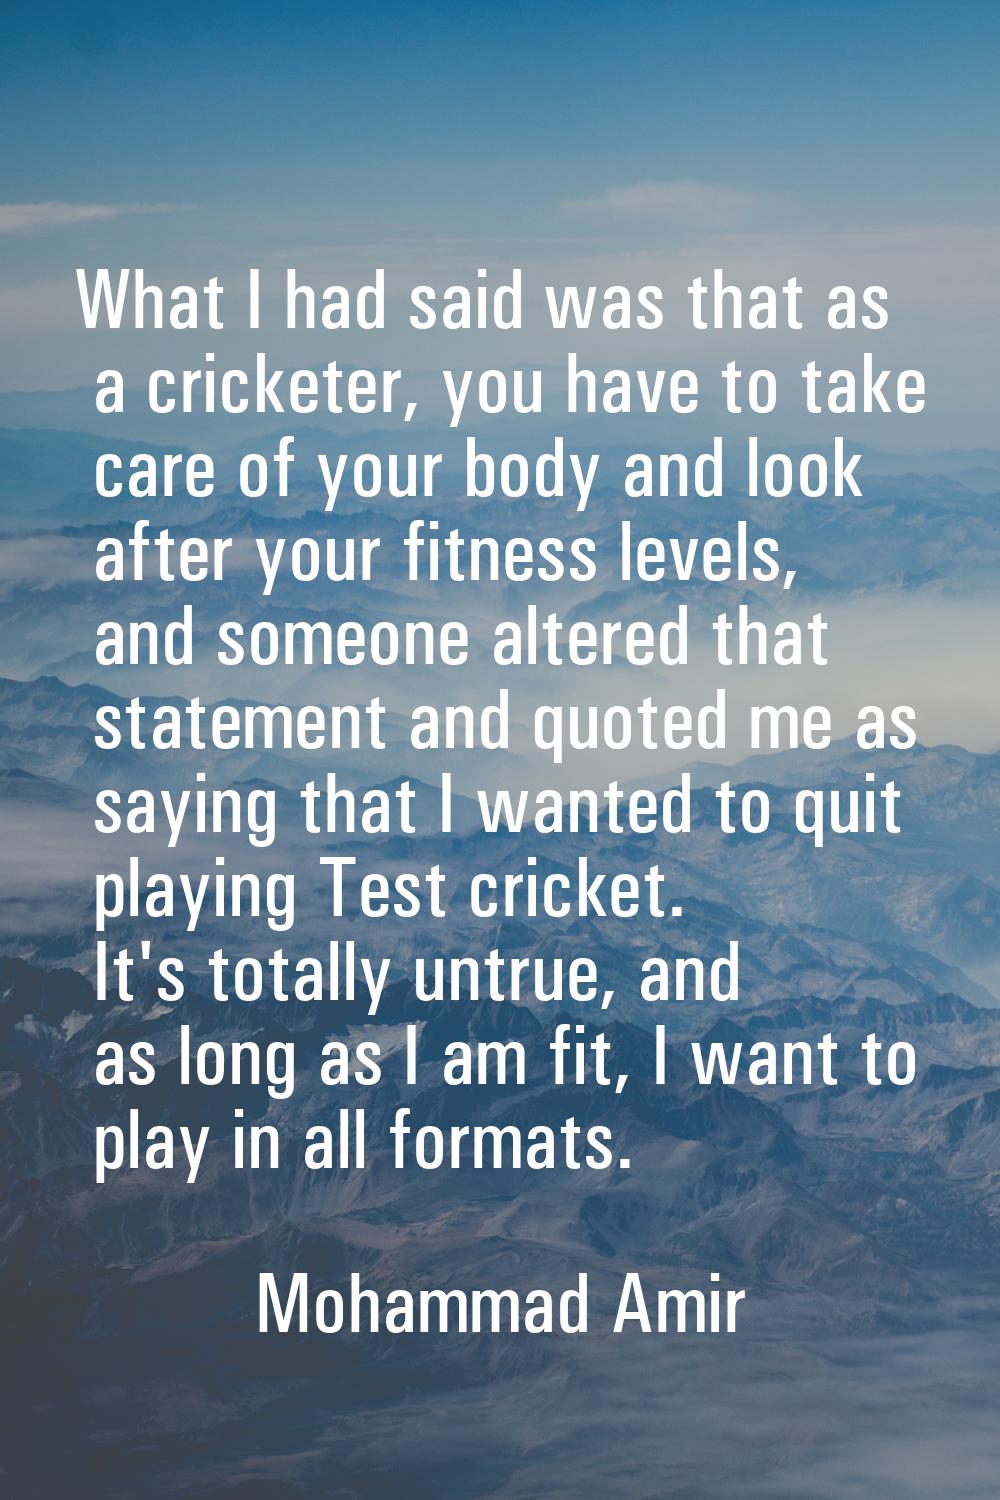 What I had said was that as a cricketer, you have to take care of your body and look after your fit